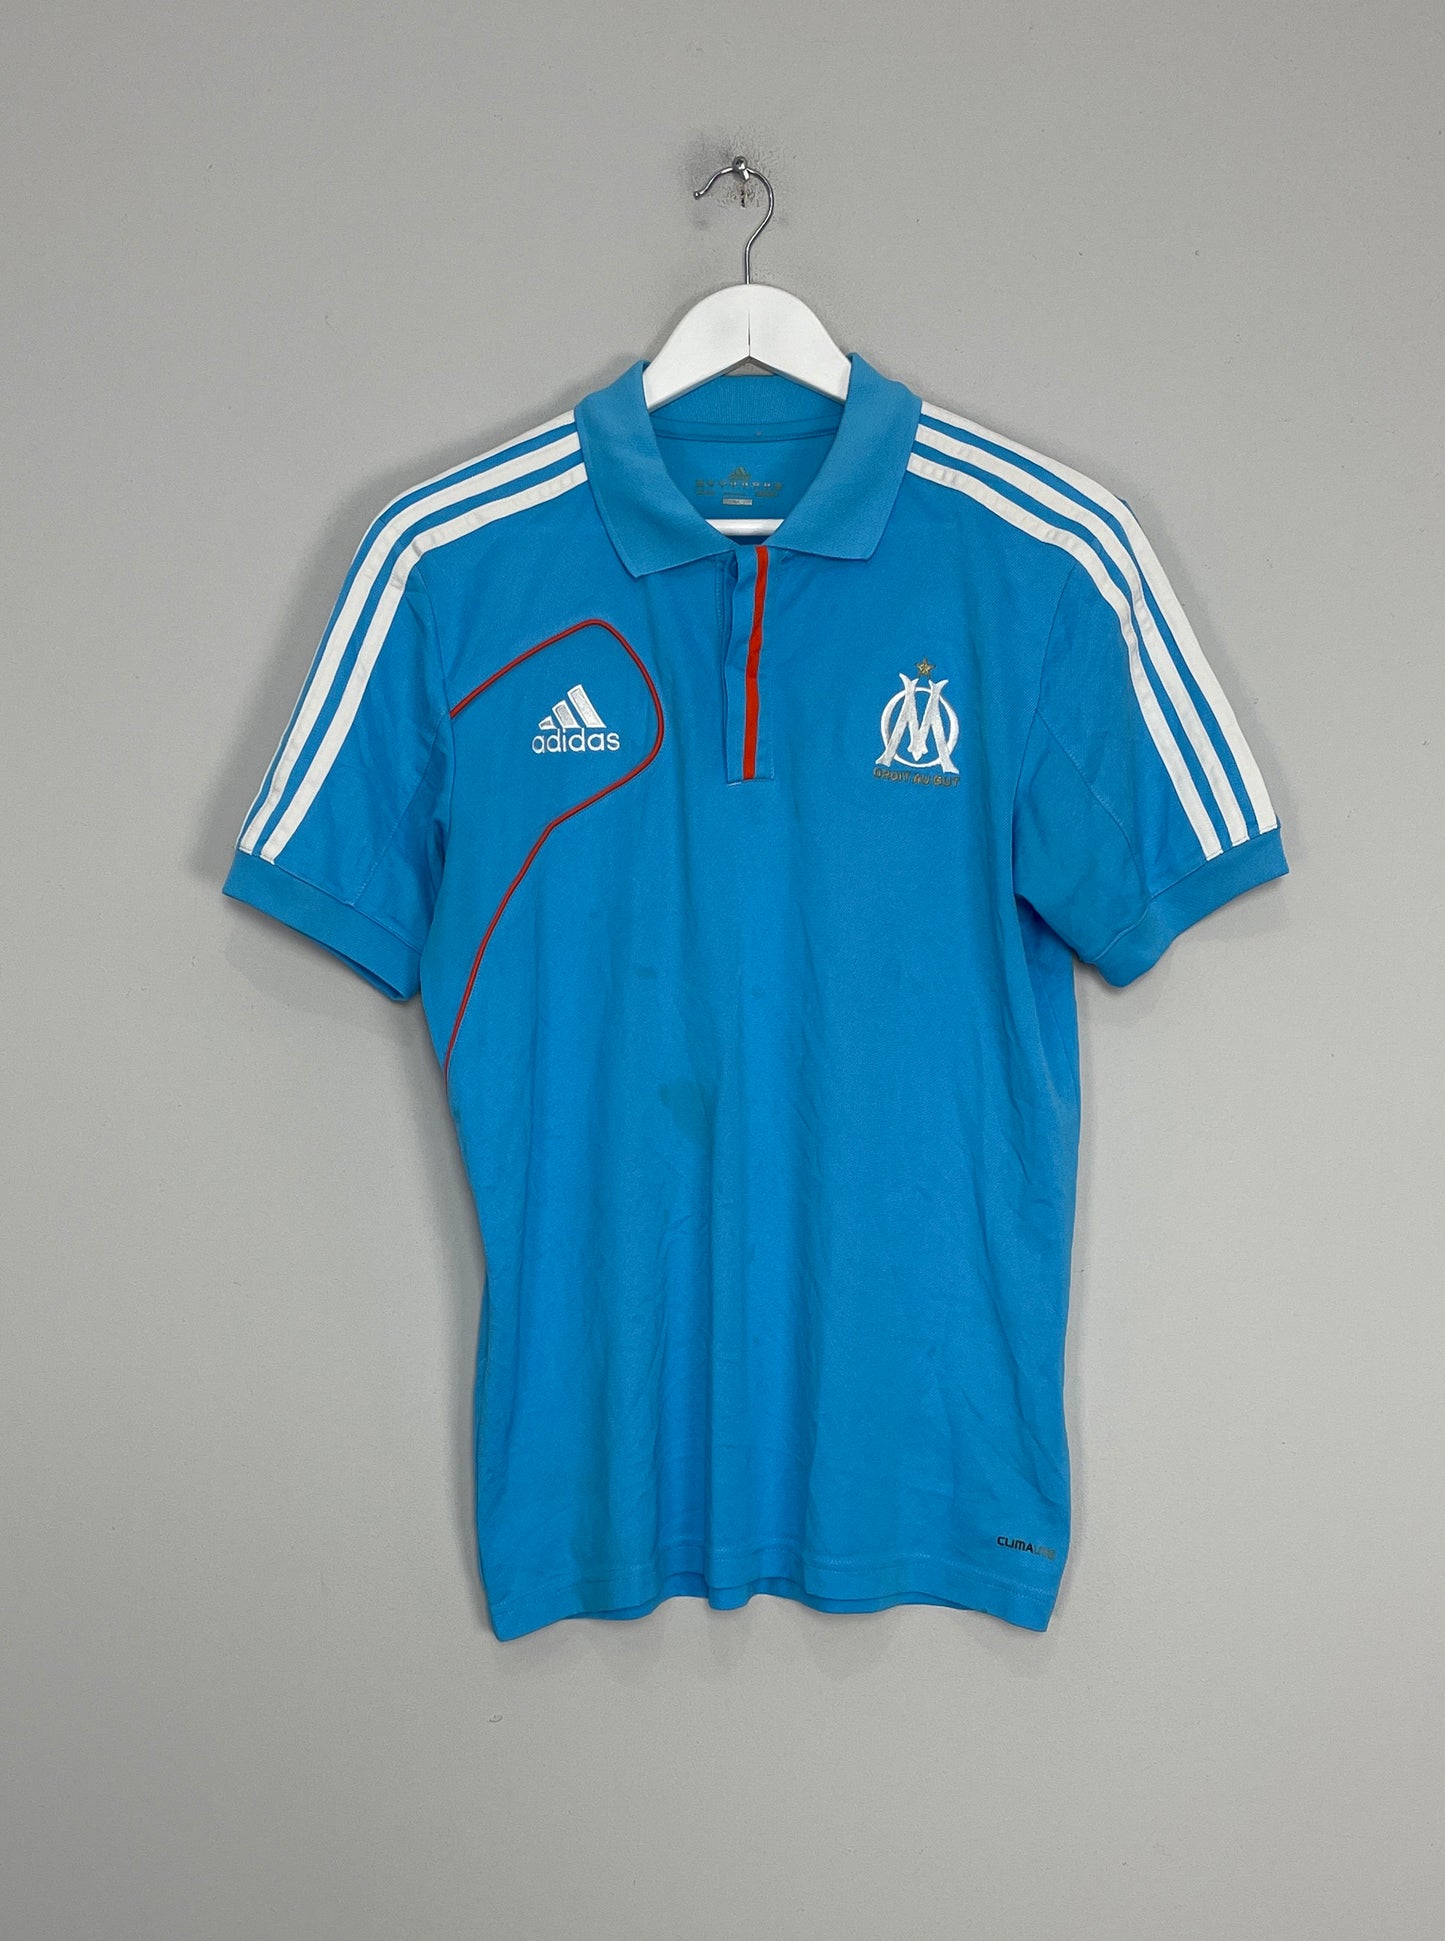 Image of the Marseille shirt from the 2012/13 season